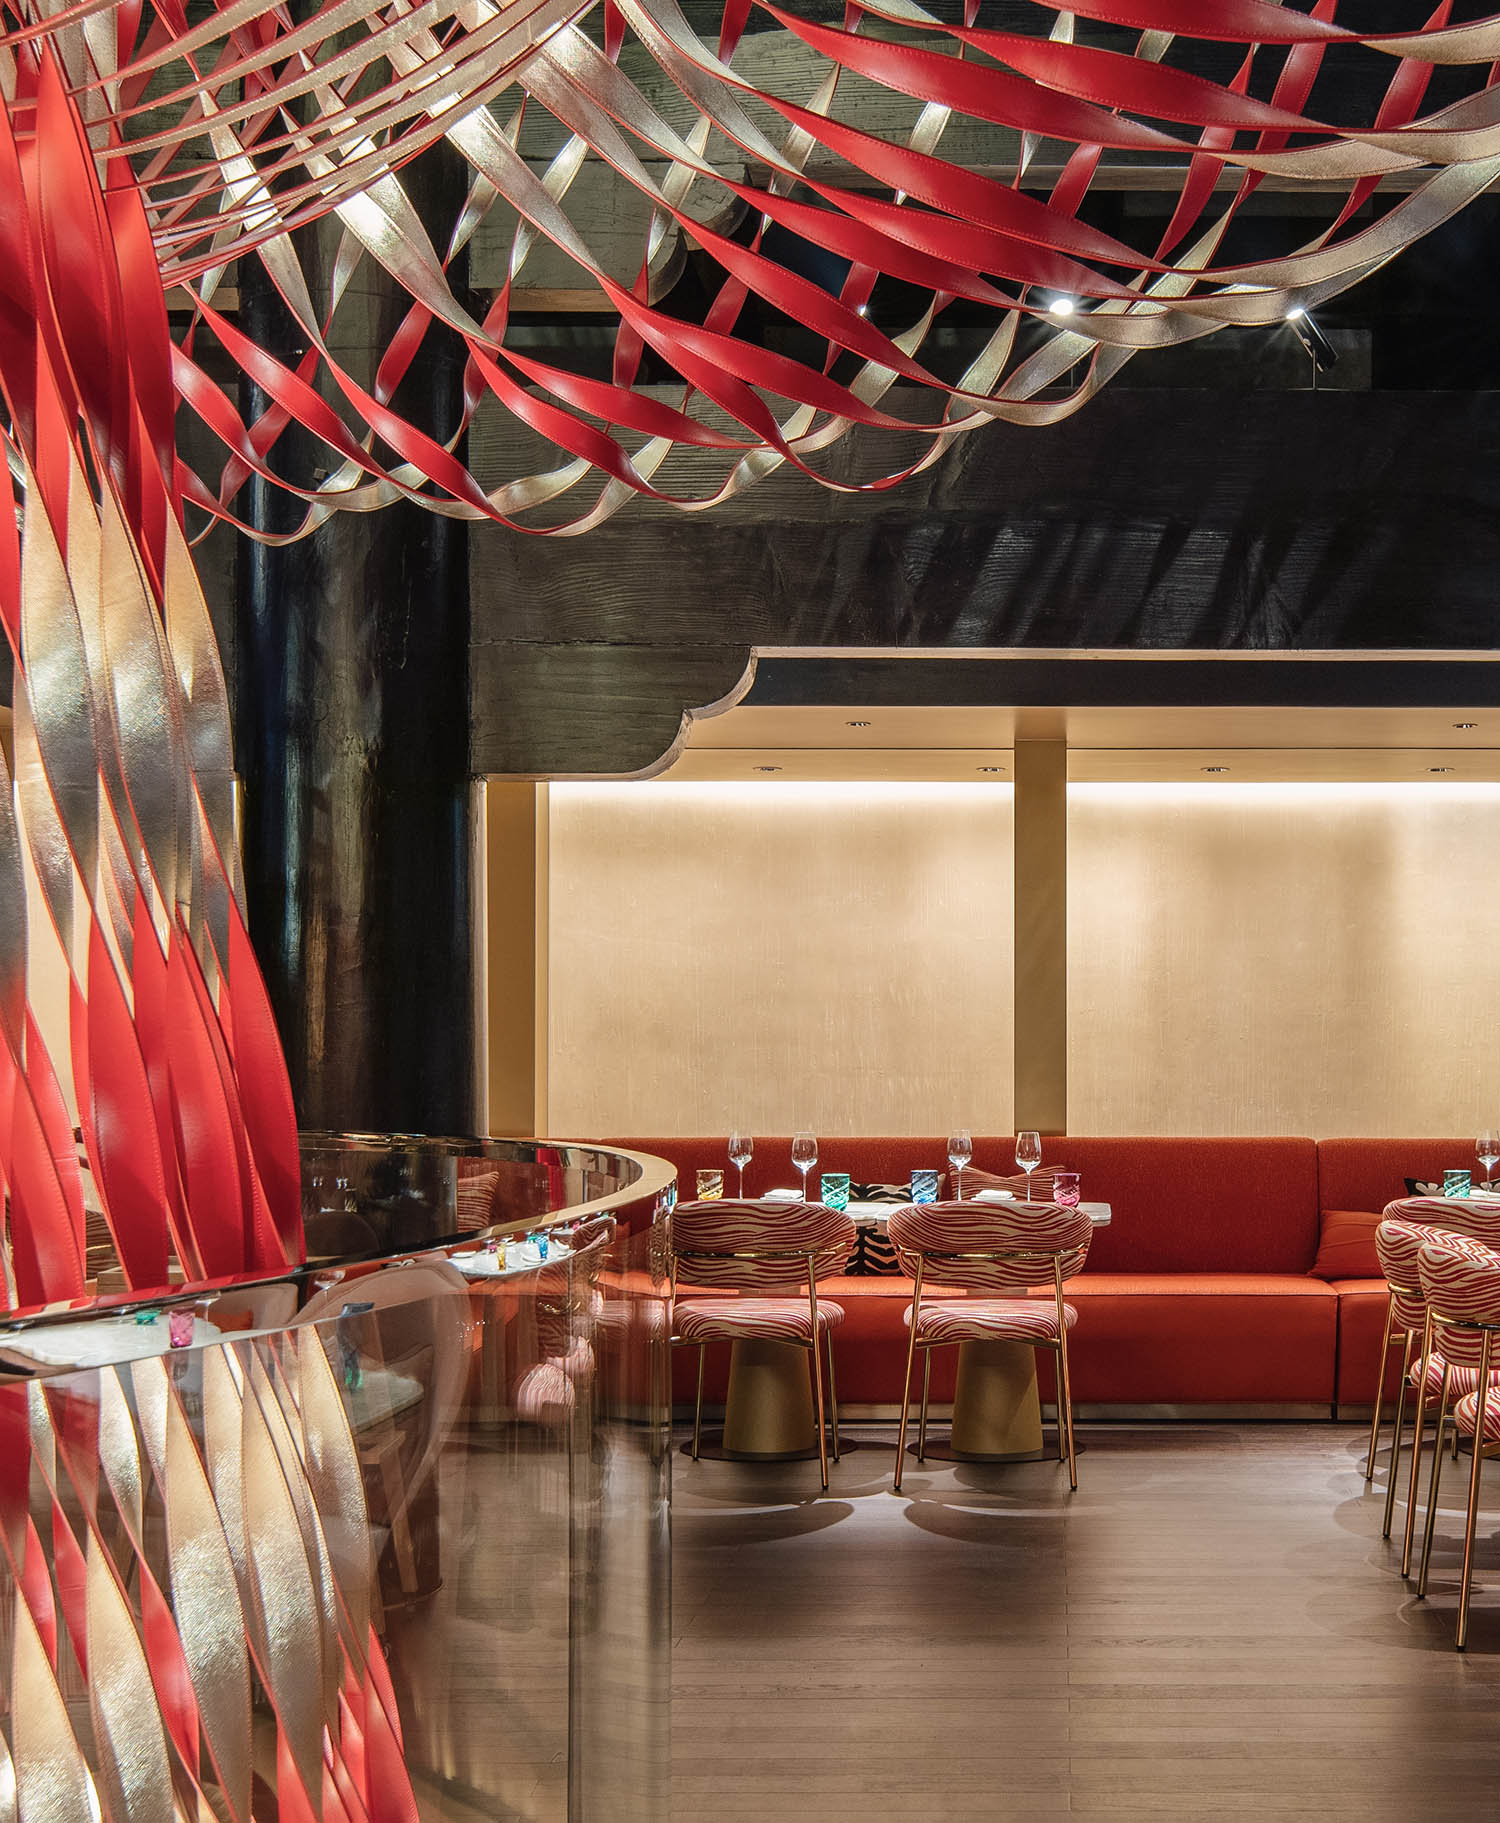 EXCLUSIVE: Louis Vuitton Opens The Hall, Its First Restaurant in China